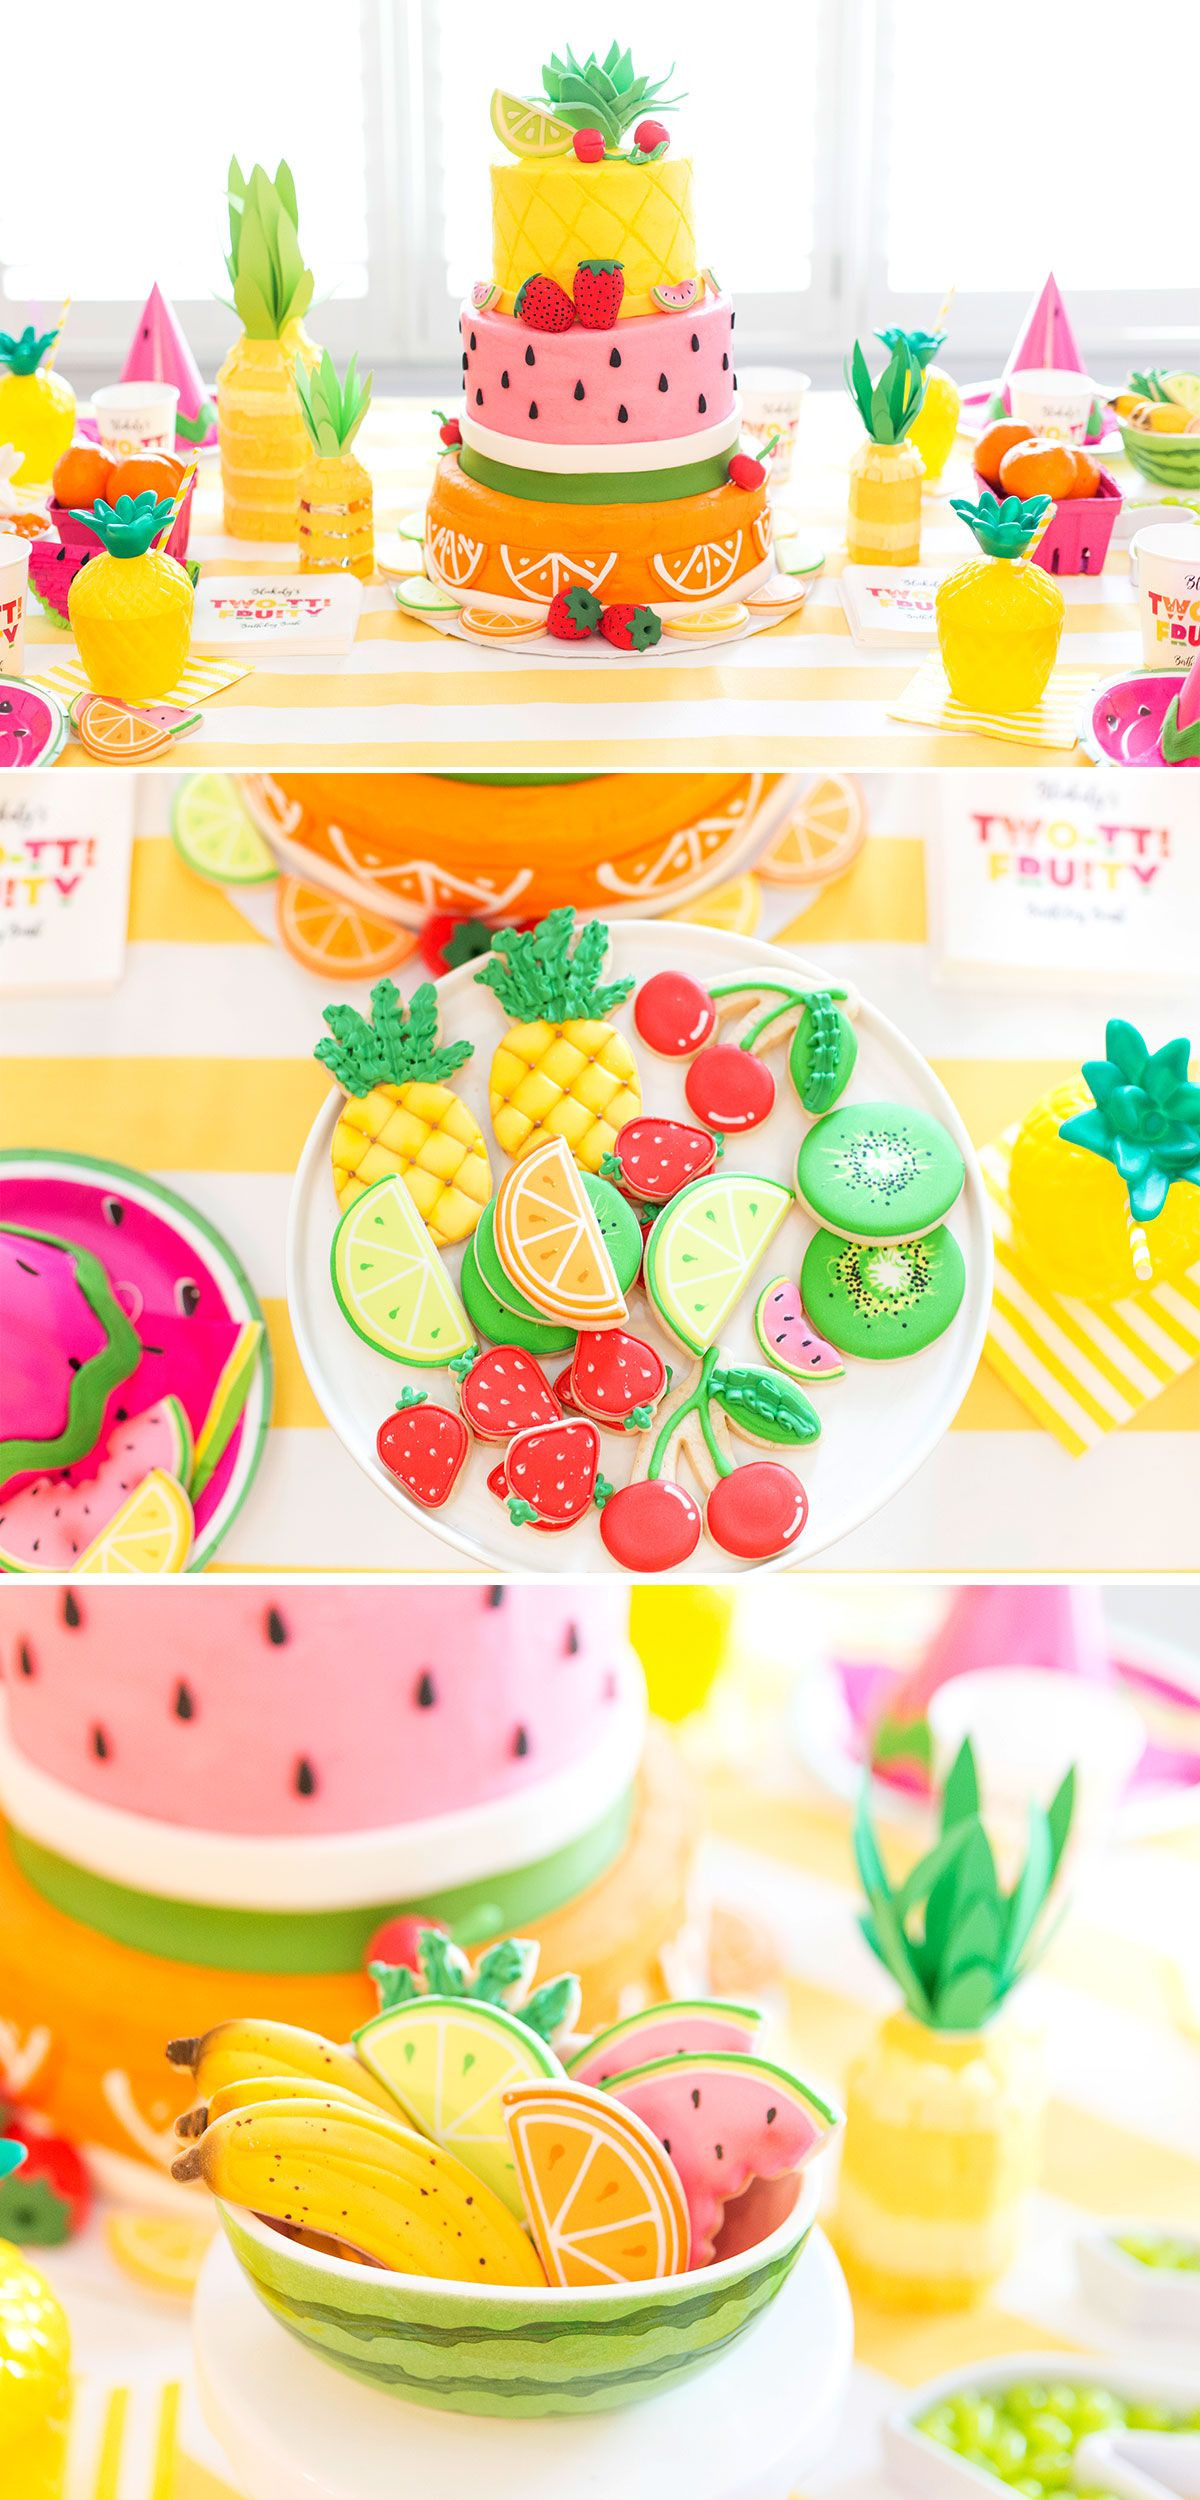 Girl Summer Birthday Party Ideas
 Two tti Fruity Birthday Party Blakely Turns 2